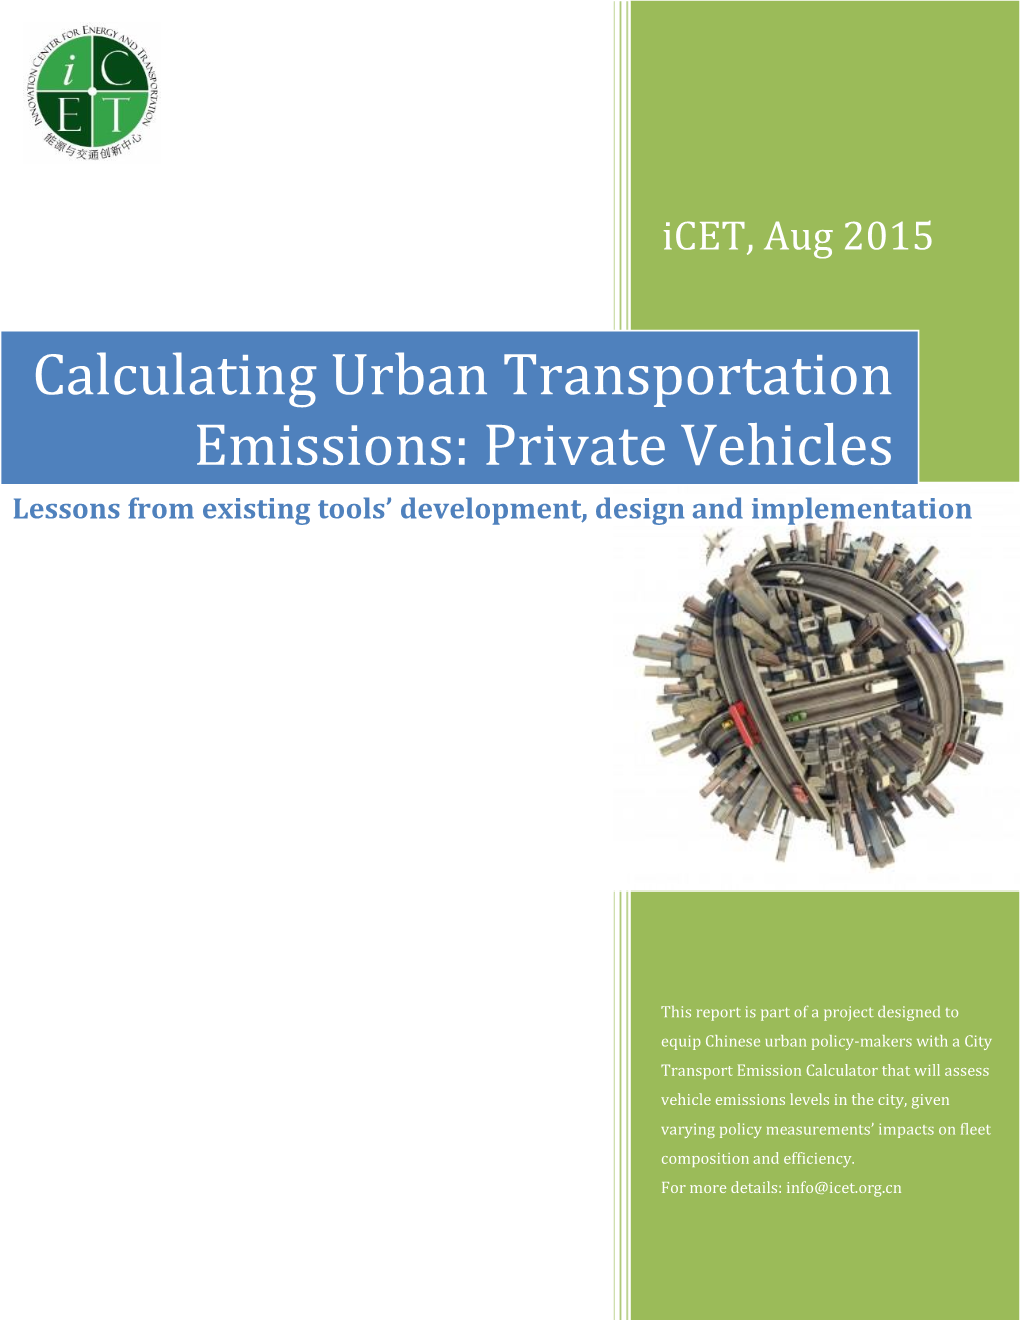 Calculating Urban Transportation Emissions: Private Vehicles Lessons from Existing Tools’ Development, Design and Implementation